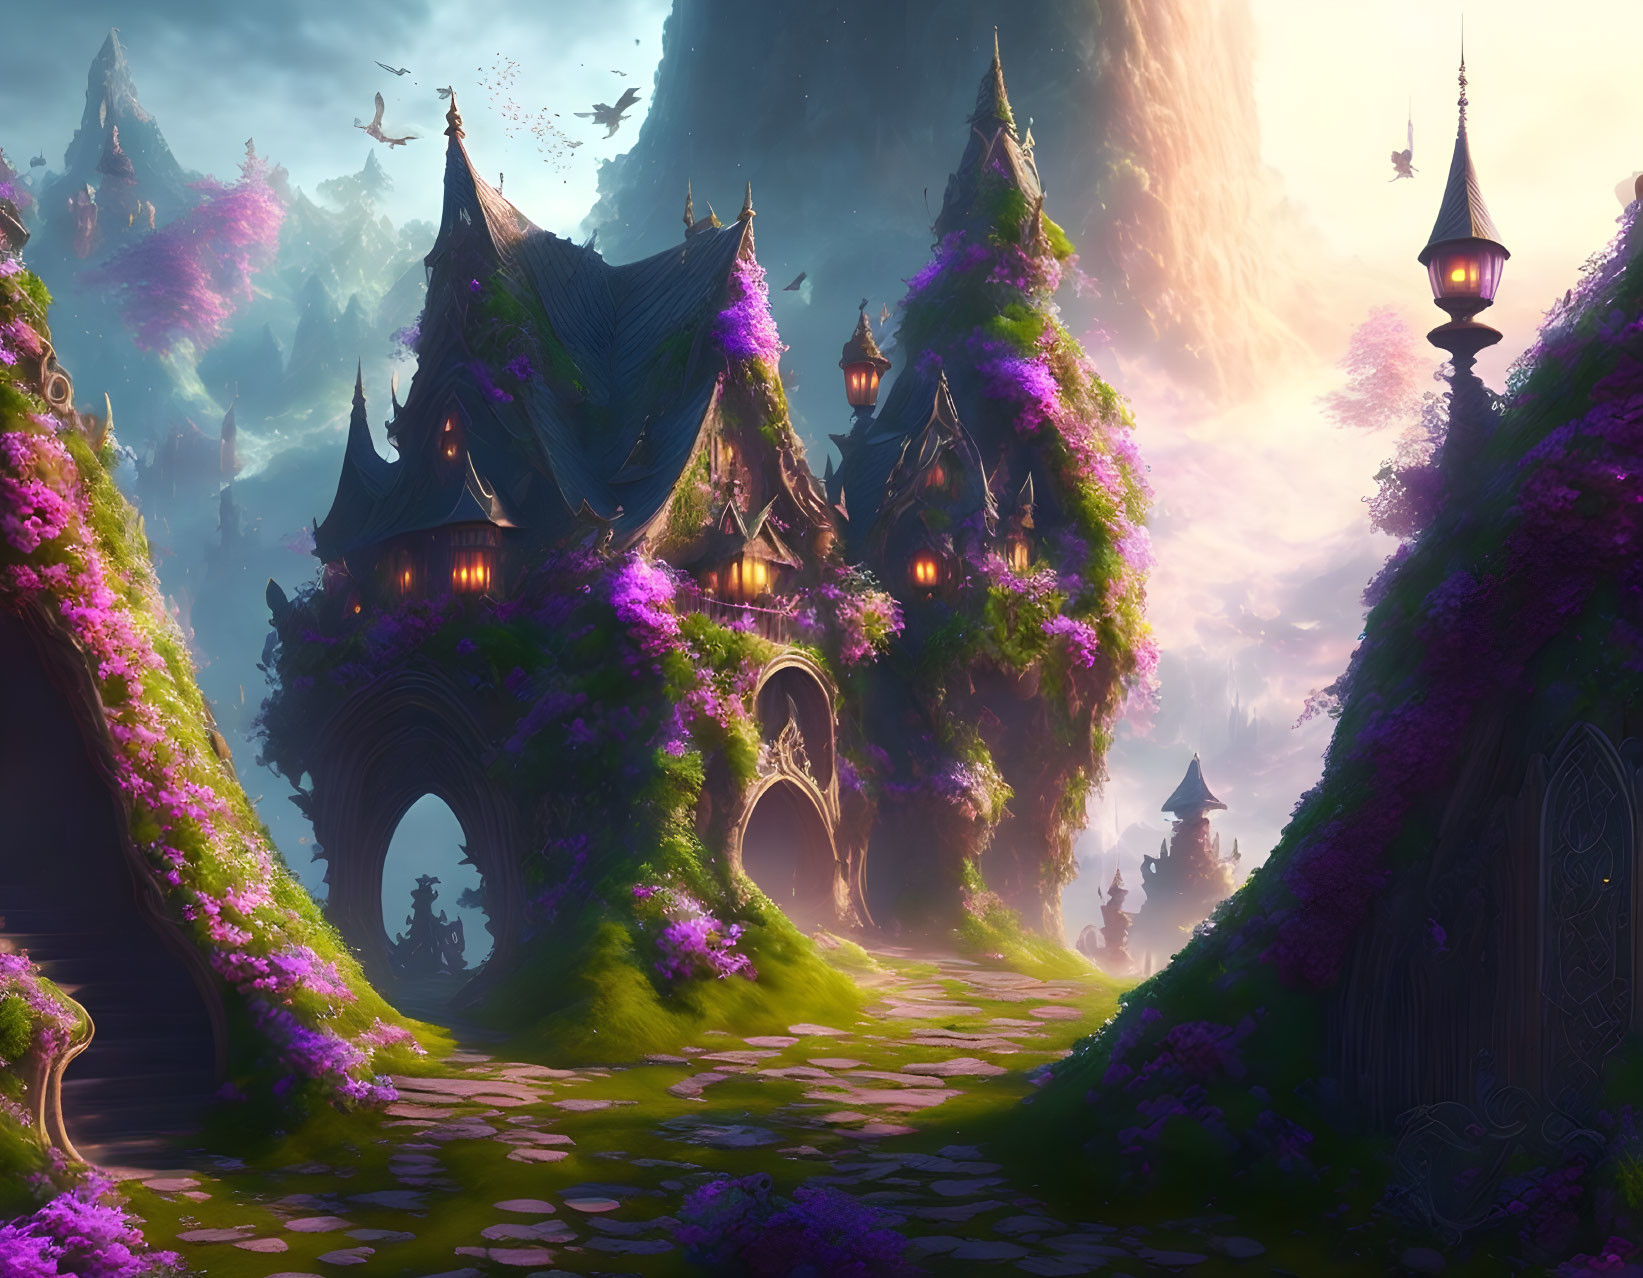 Fantasy castle surrounded by greenery, purple lighting, mountains, and floating islands.